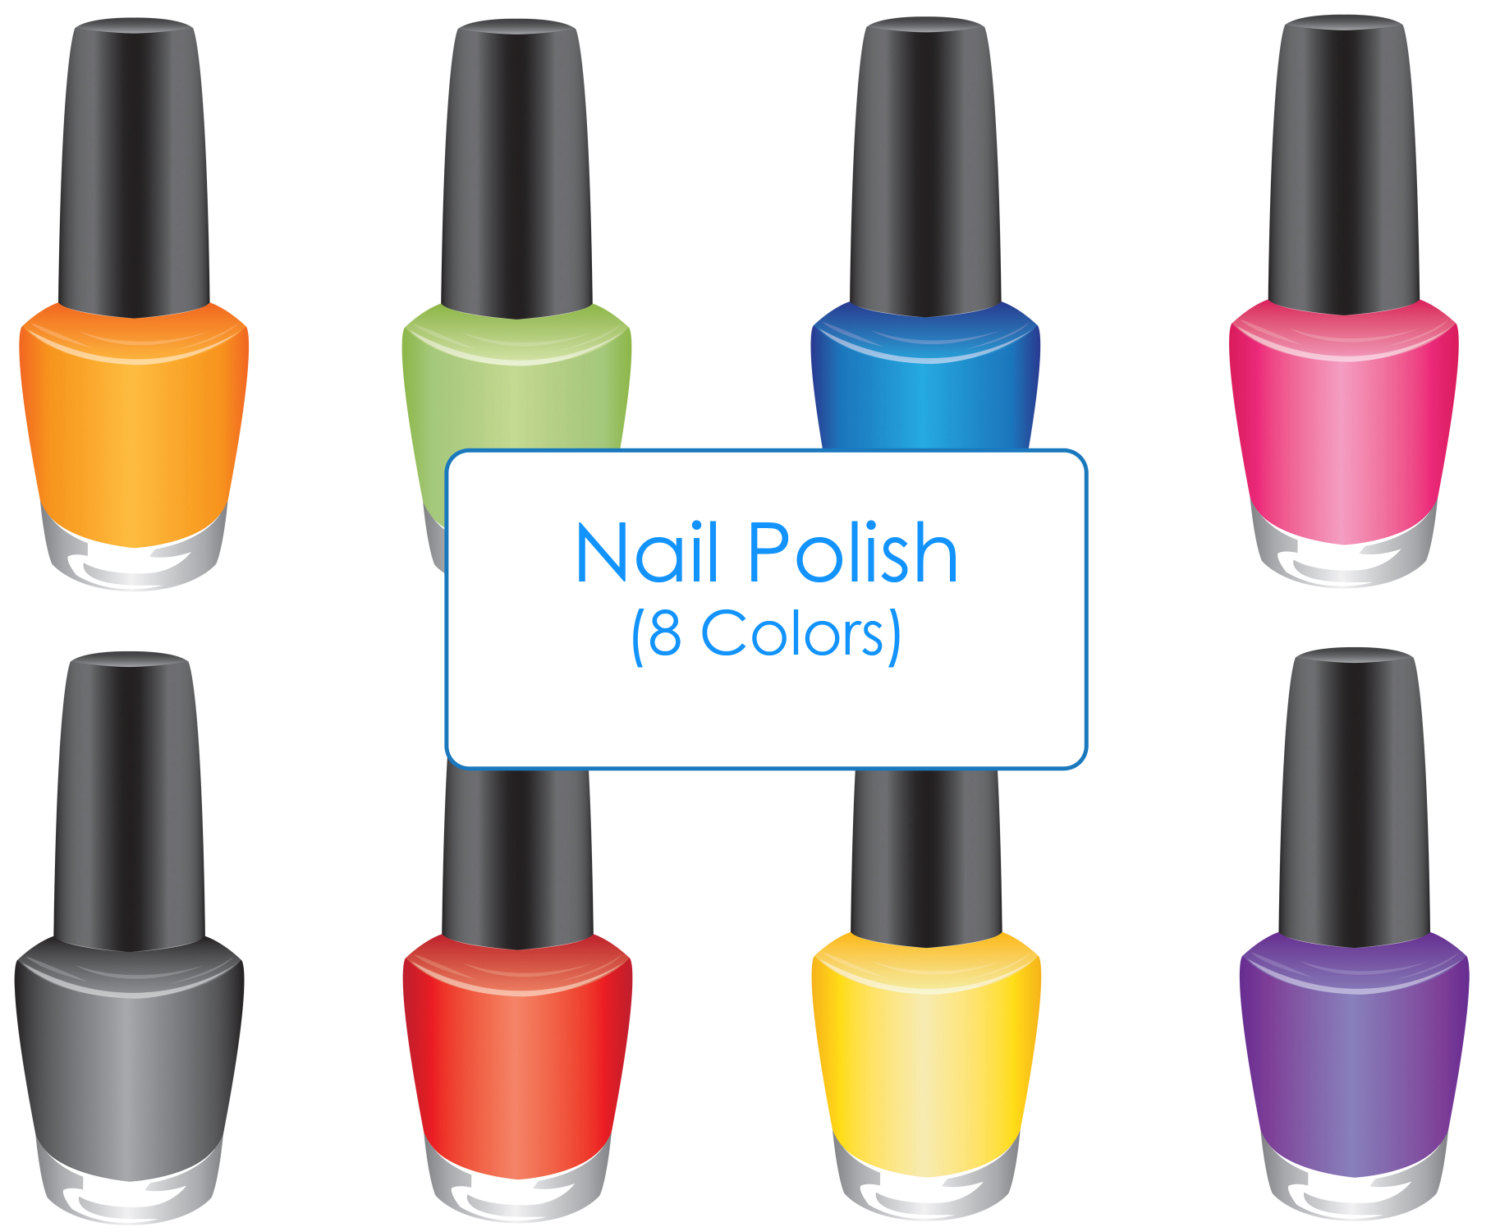 2. Best Deals on Nail Polish from Cosmetic Art - wide 8